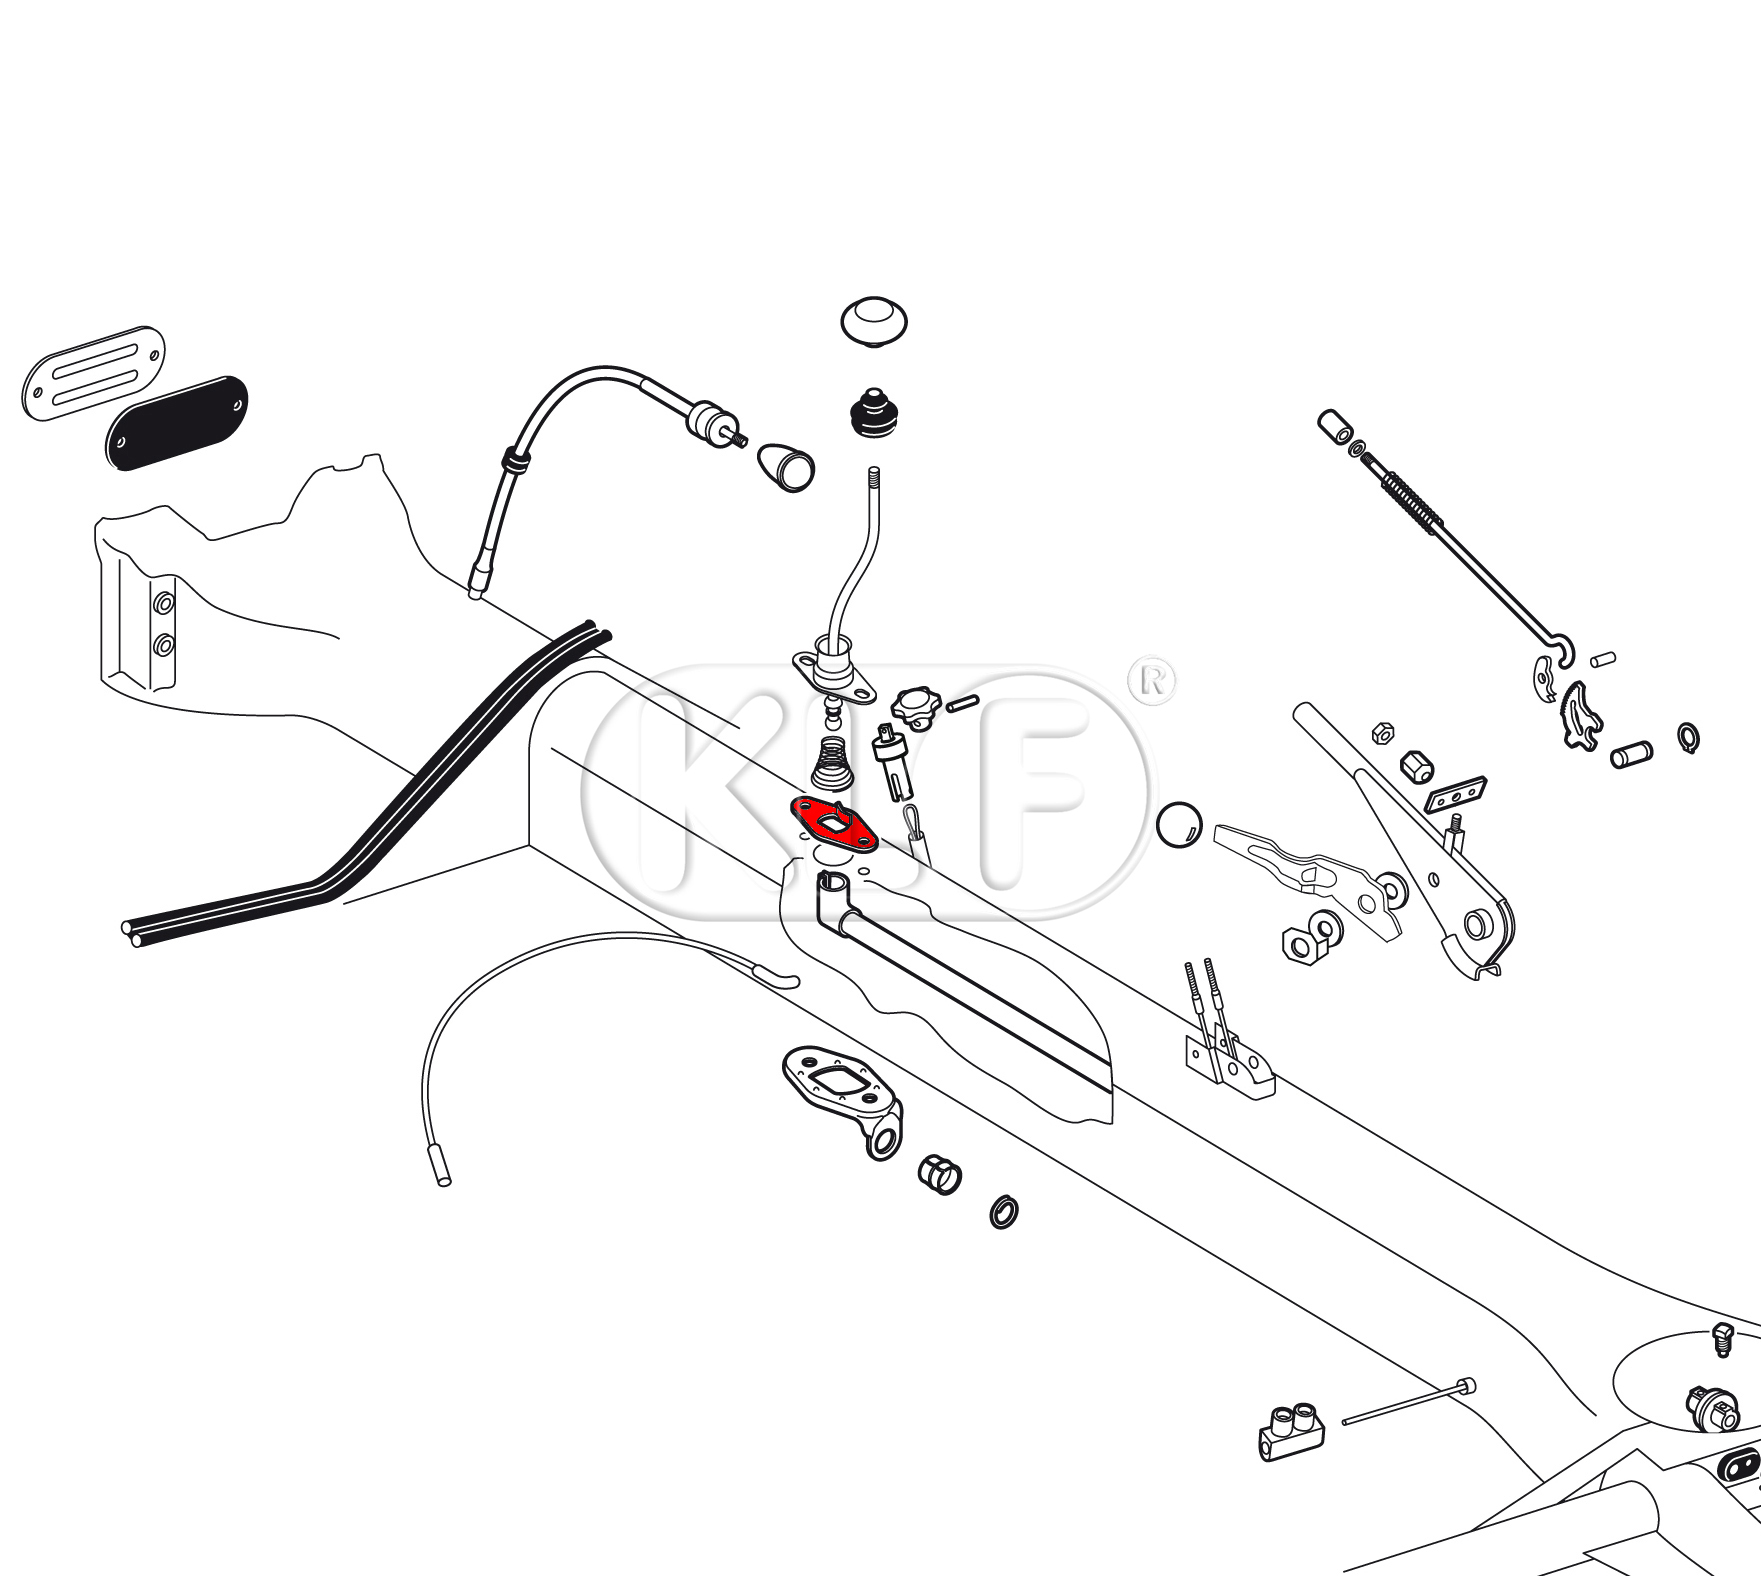 Stop plate for shift lever, year 08/71 on